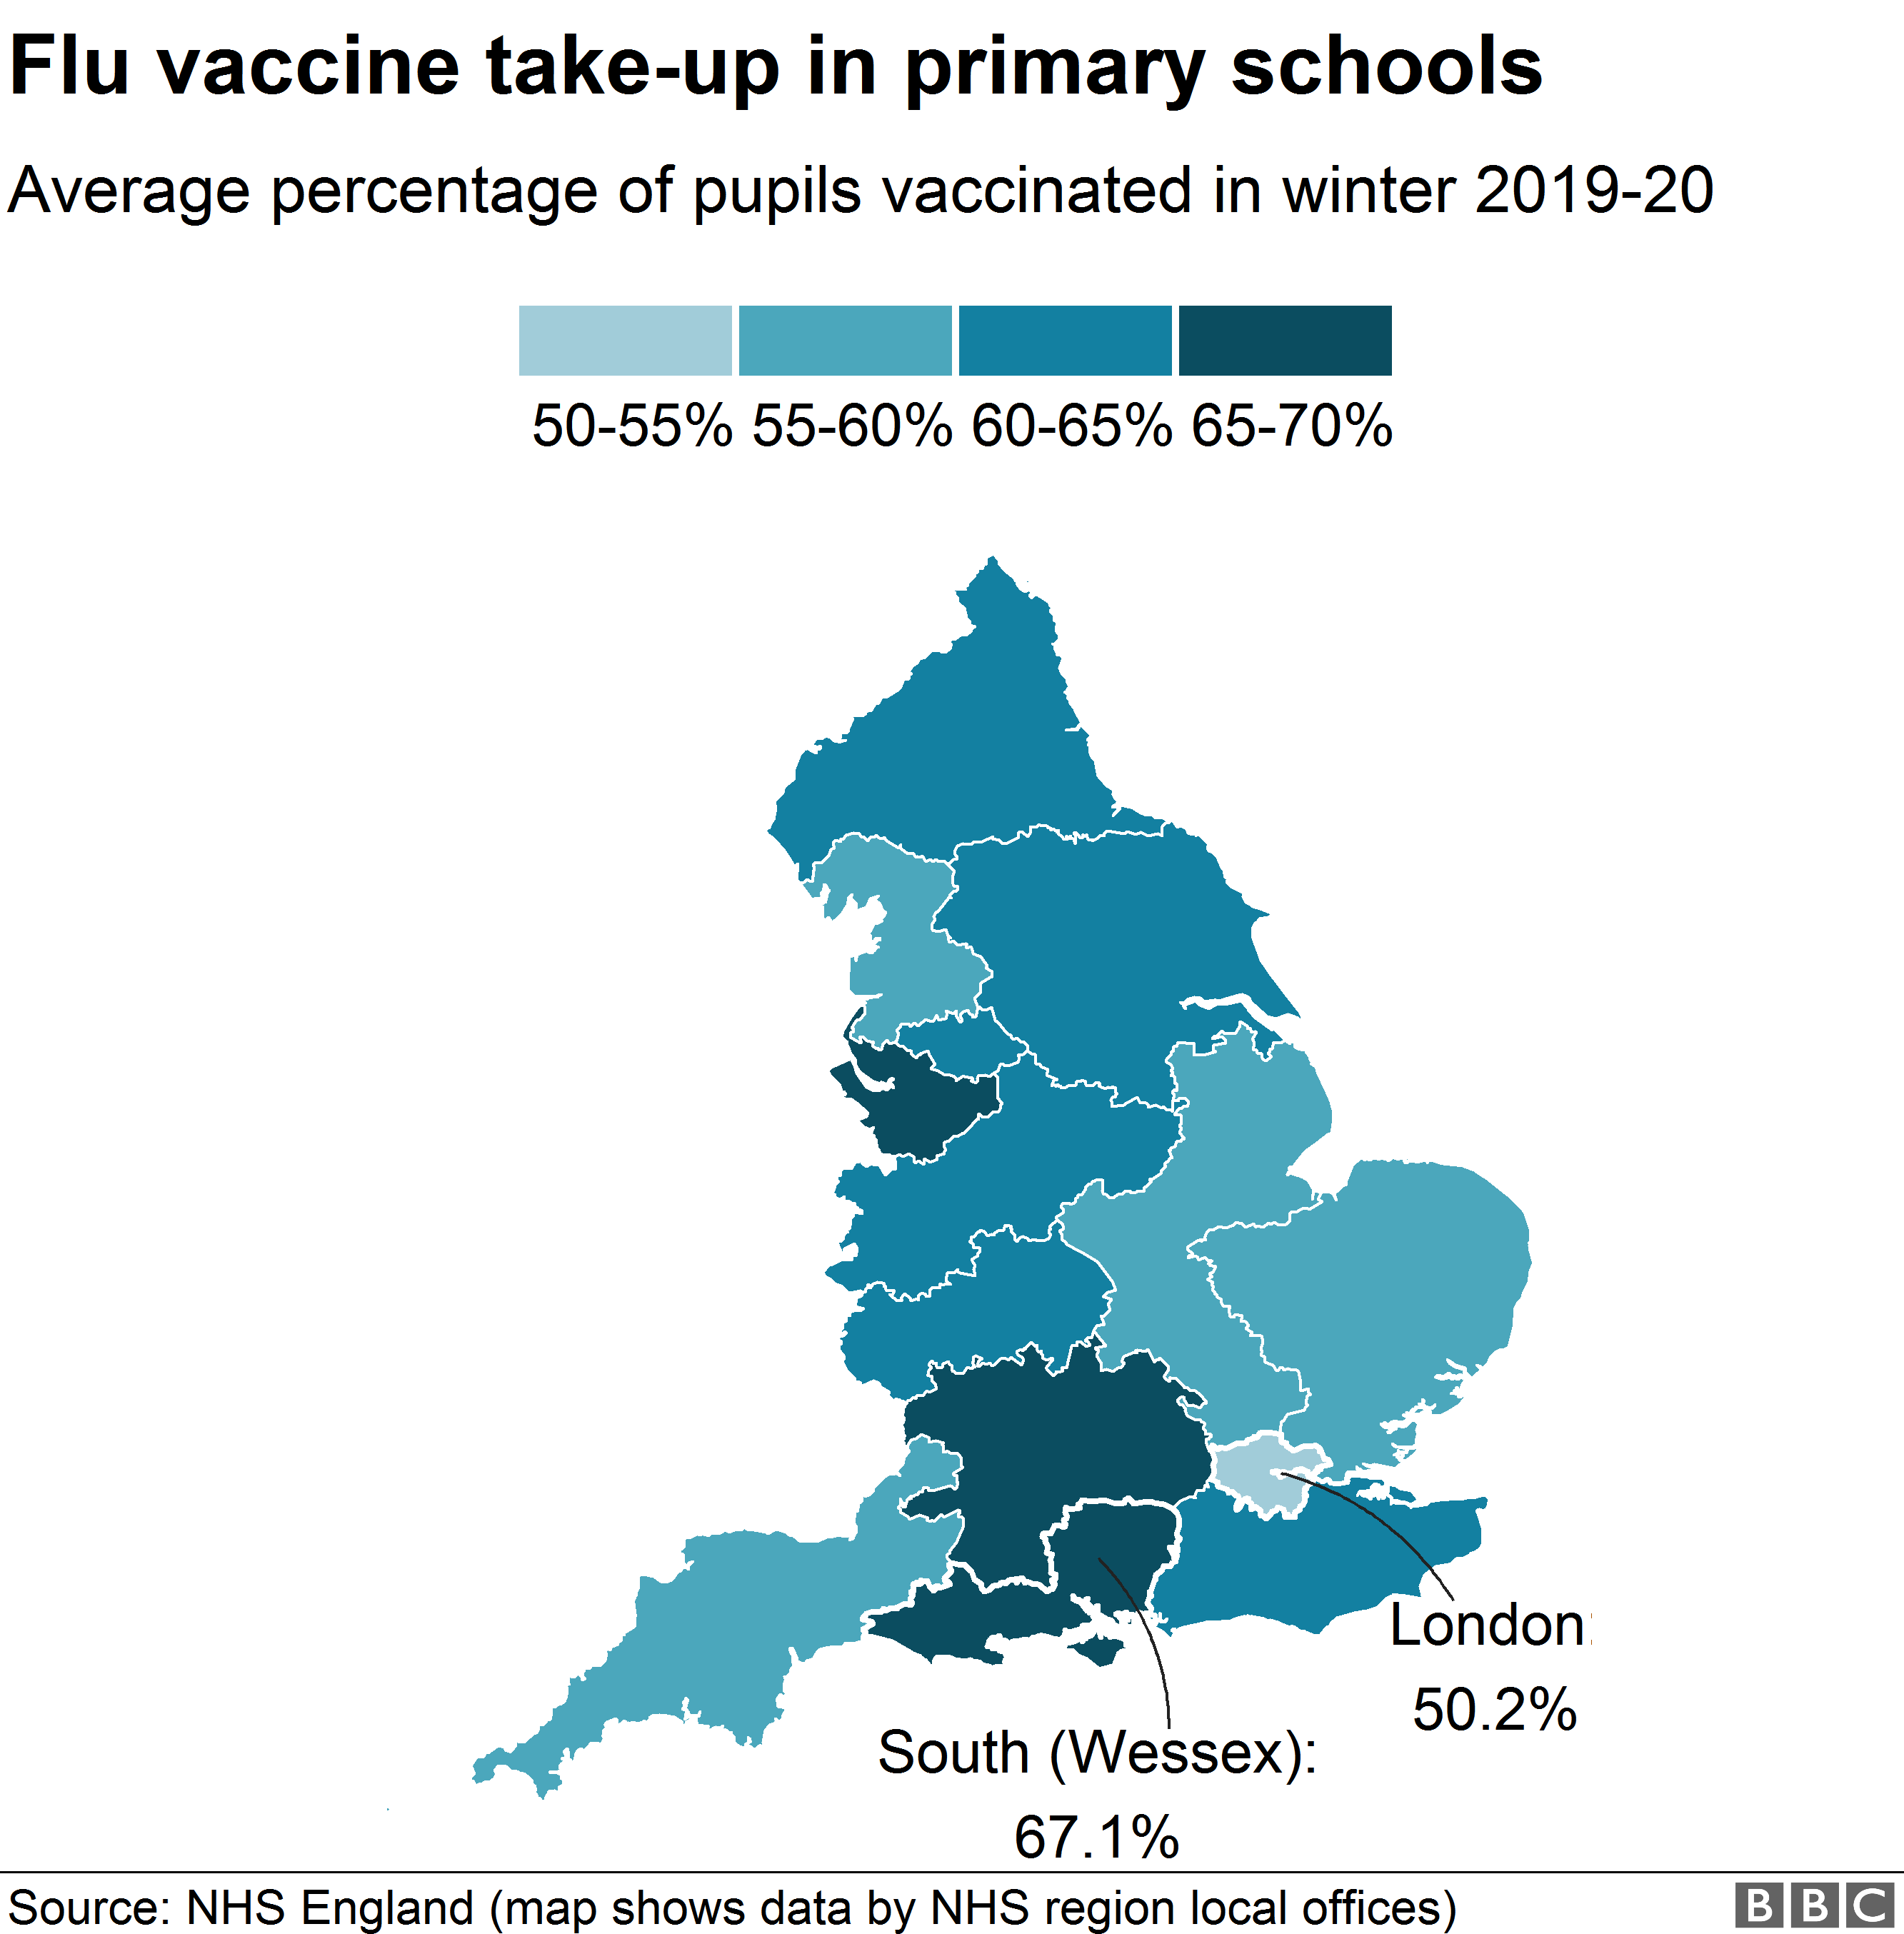 A map of the UK shows highlighted areas where flu vaccine uptake among schools is strongest - and lowest. London is highlighted as having the lowest at 50.2%